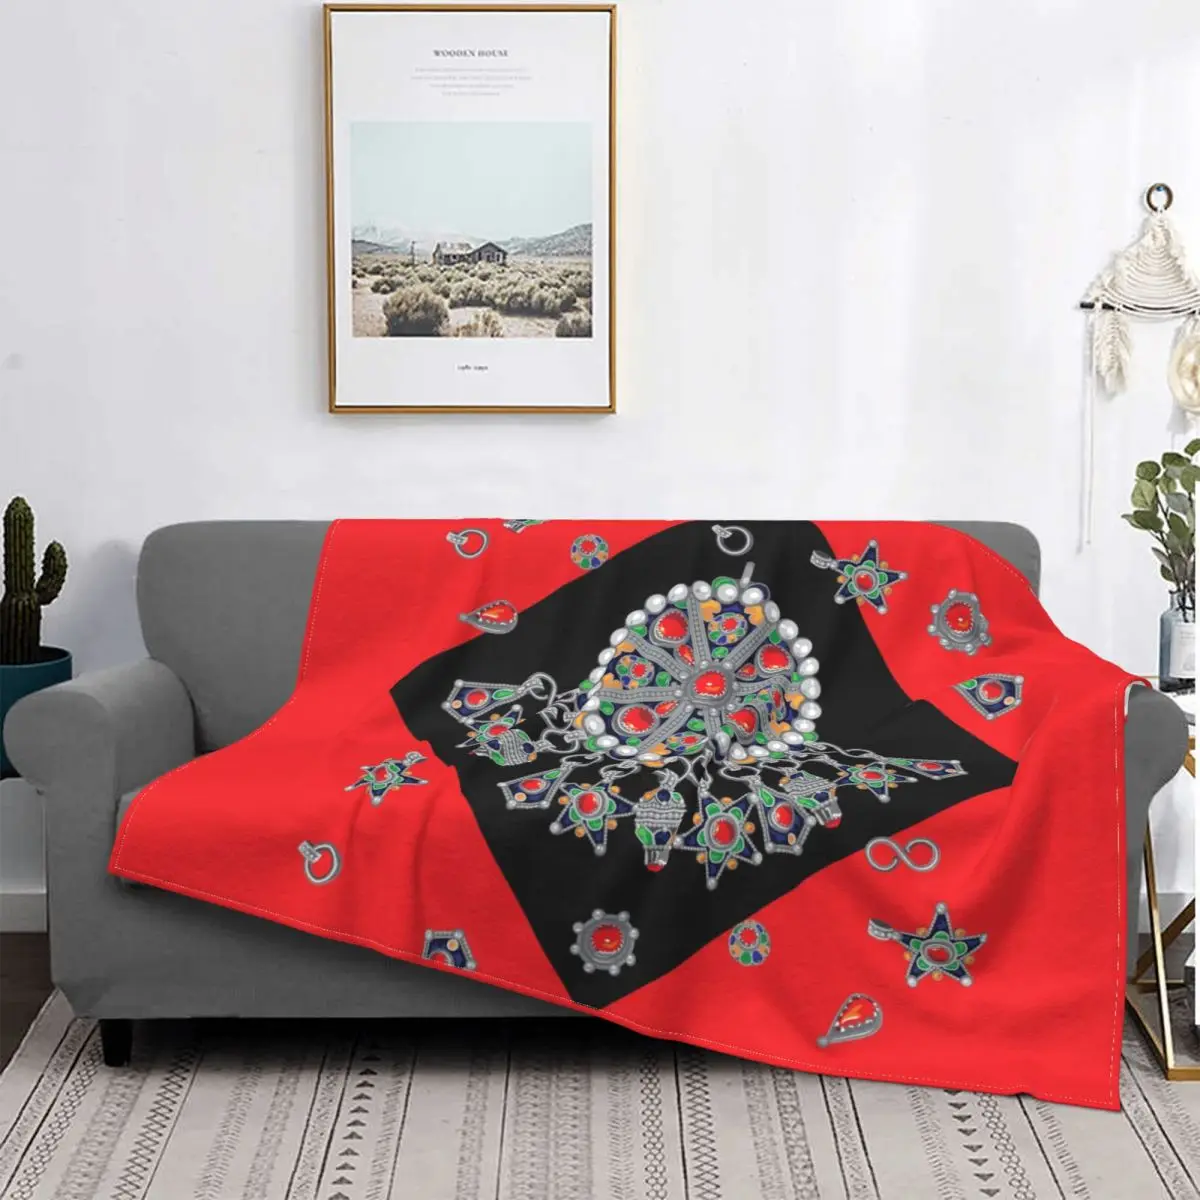 

Kabyle Pottery Patterns Blankets for Bedding Couch Bedspread Warm Flannel Amazigh Morocco Throw Blanket